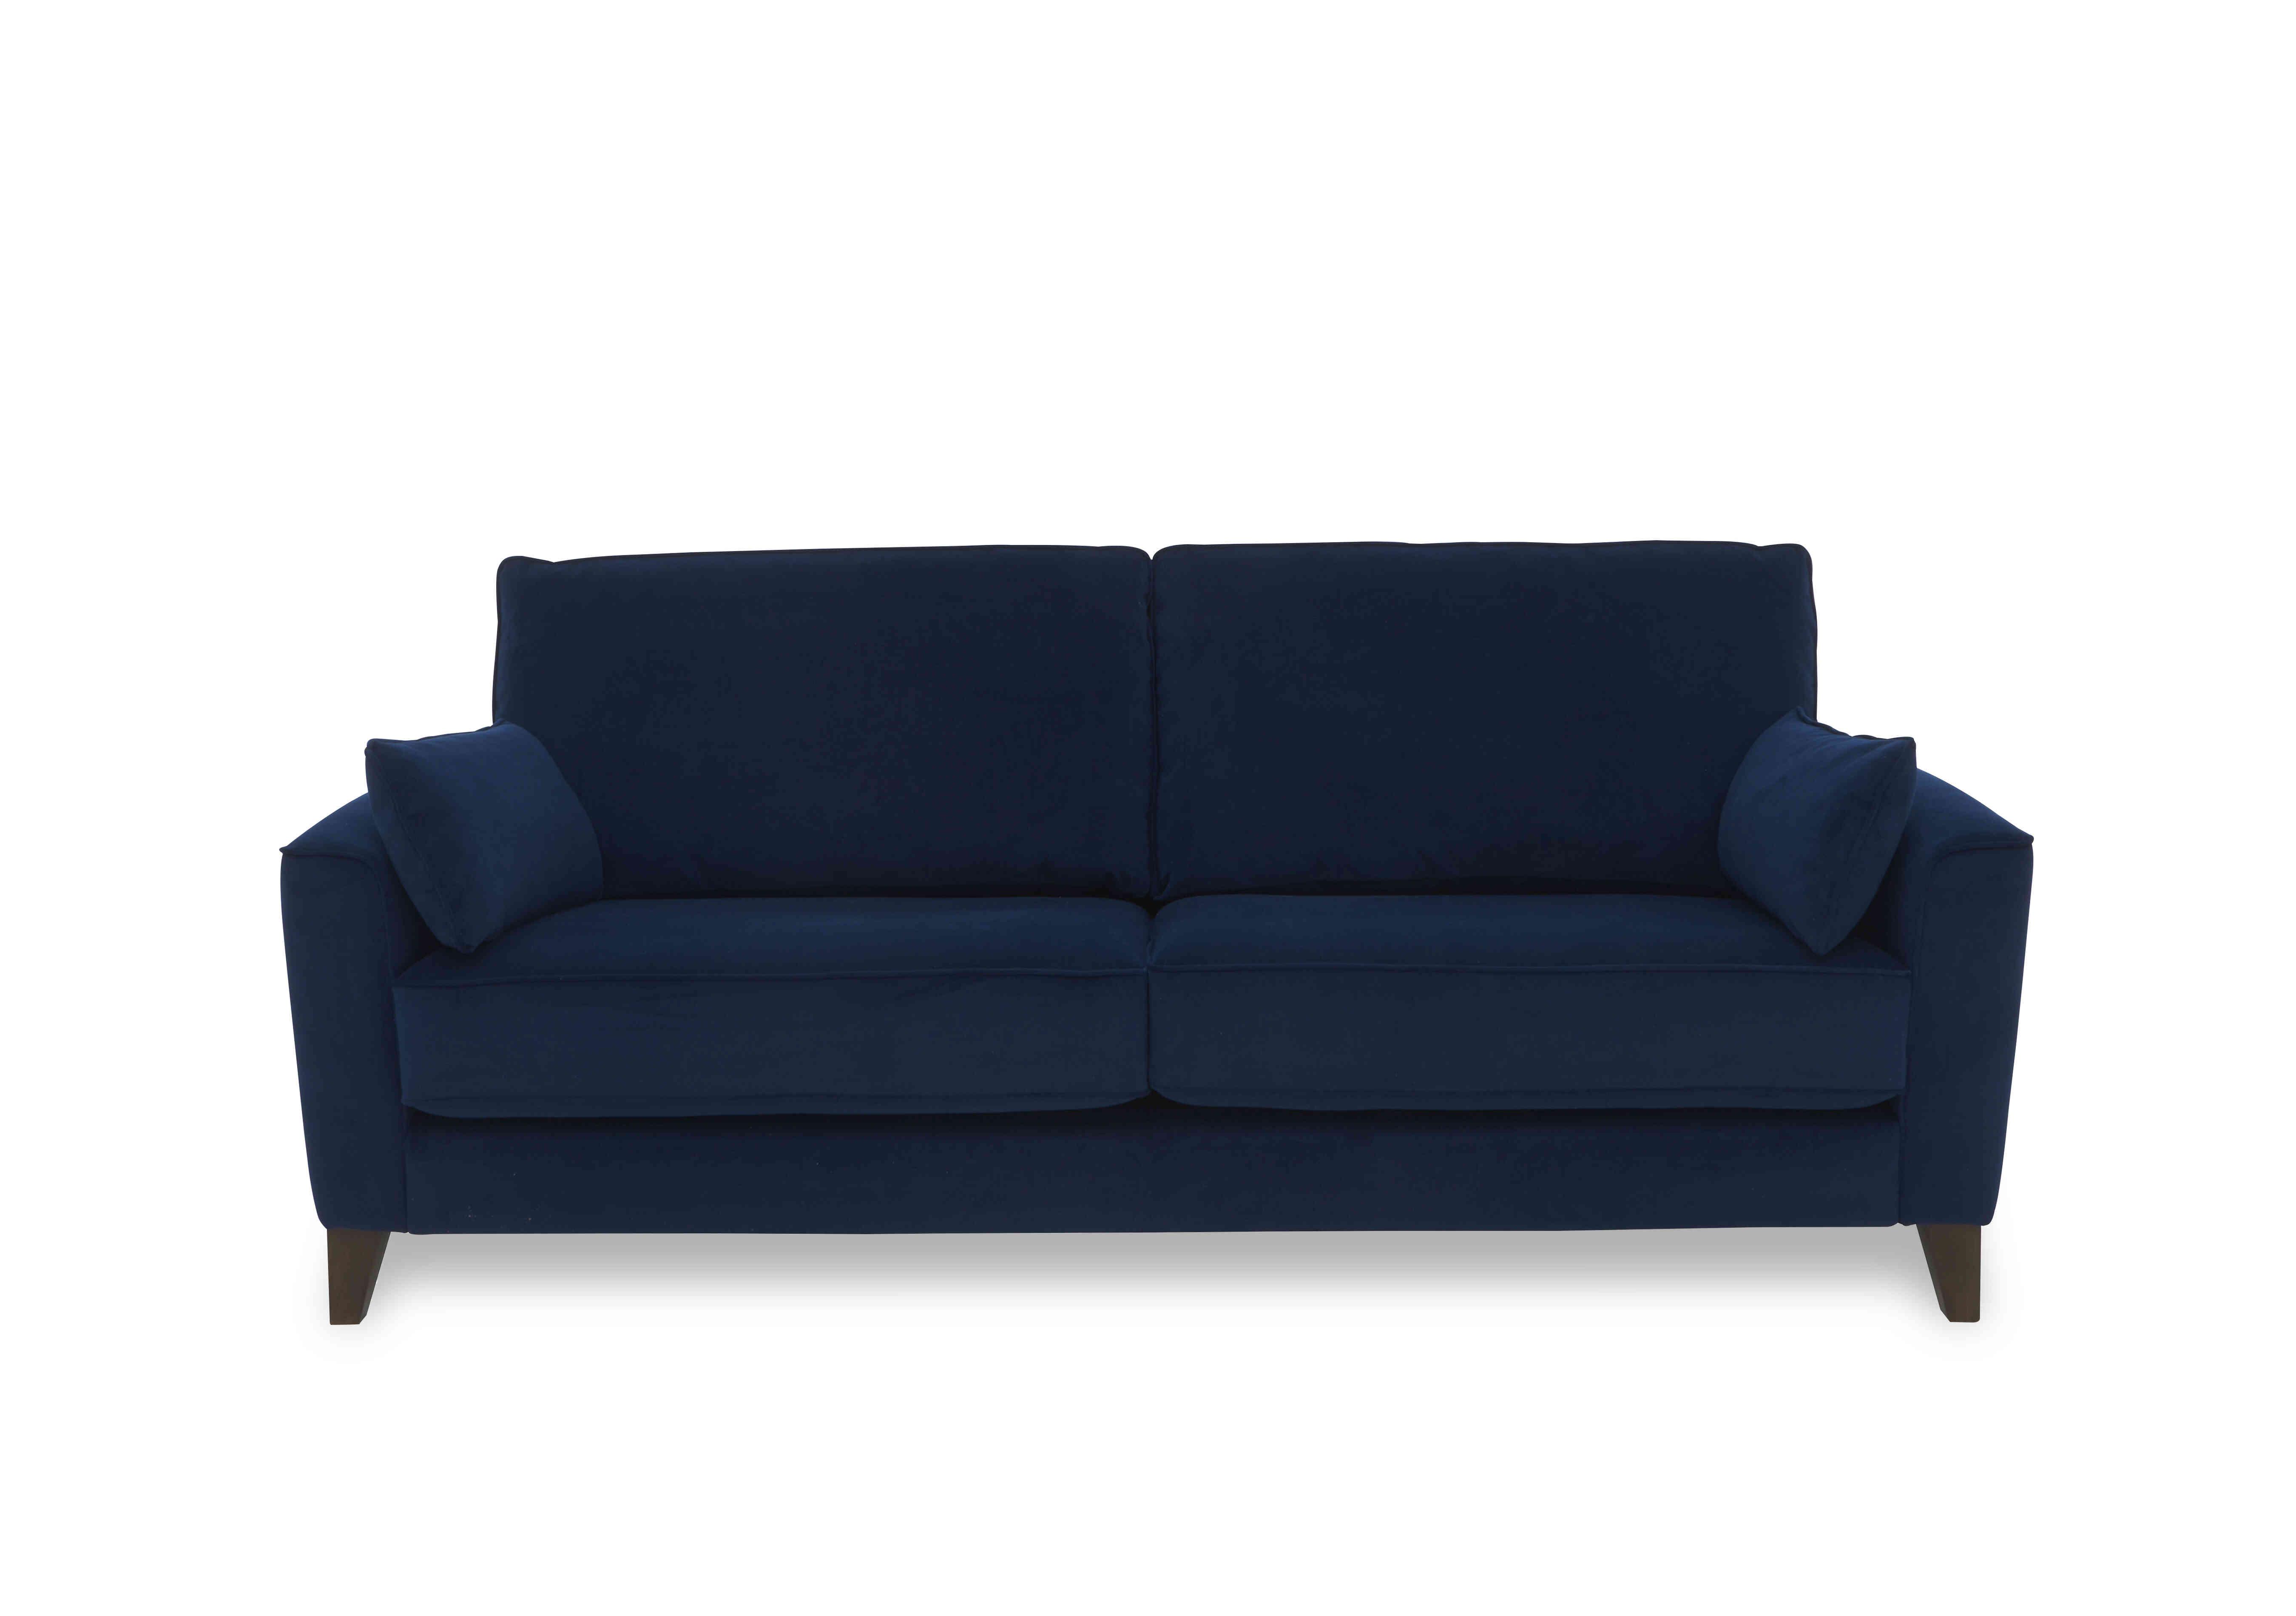 Brondby 3 Seater Fabric Sofa in Fab-Meg-R28 Navy on Furniture Village